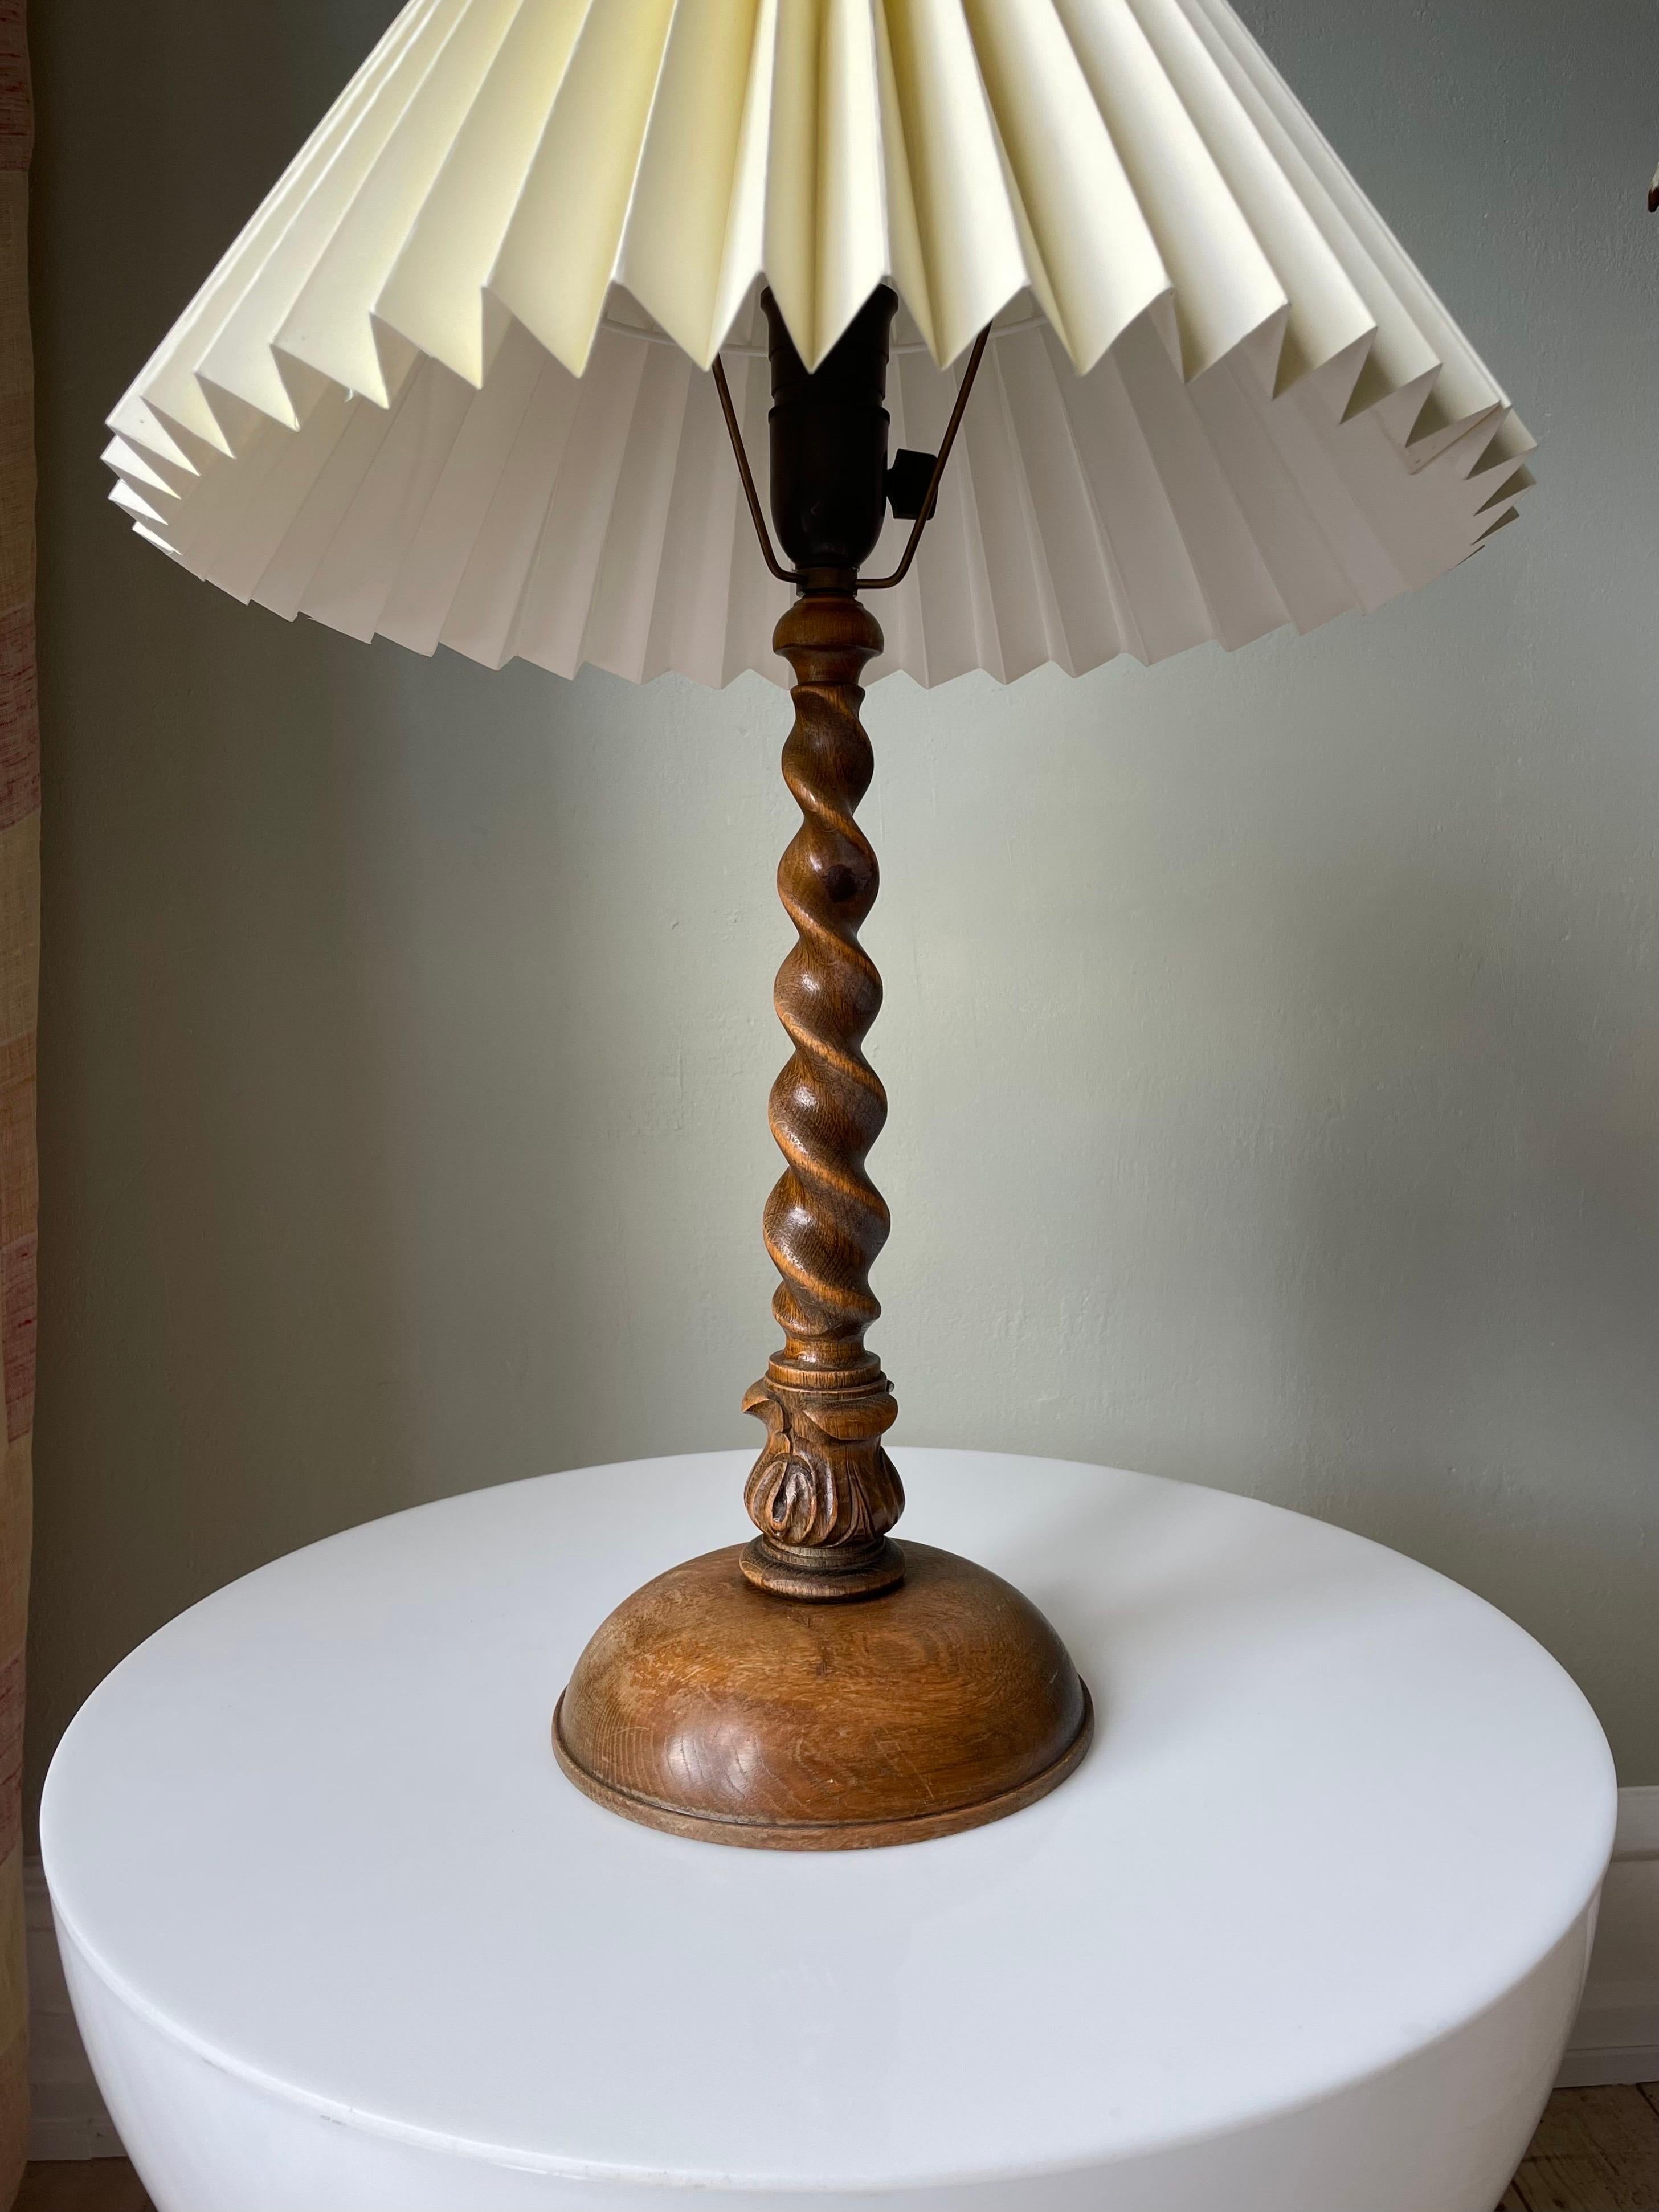 Tall Vintage Swirling Wooden Table Lamp, 1960s For Sale 1